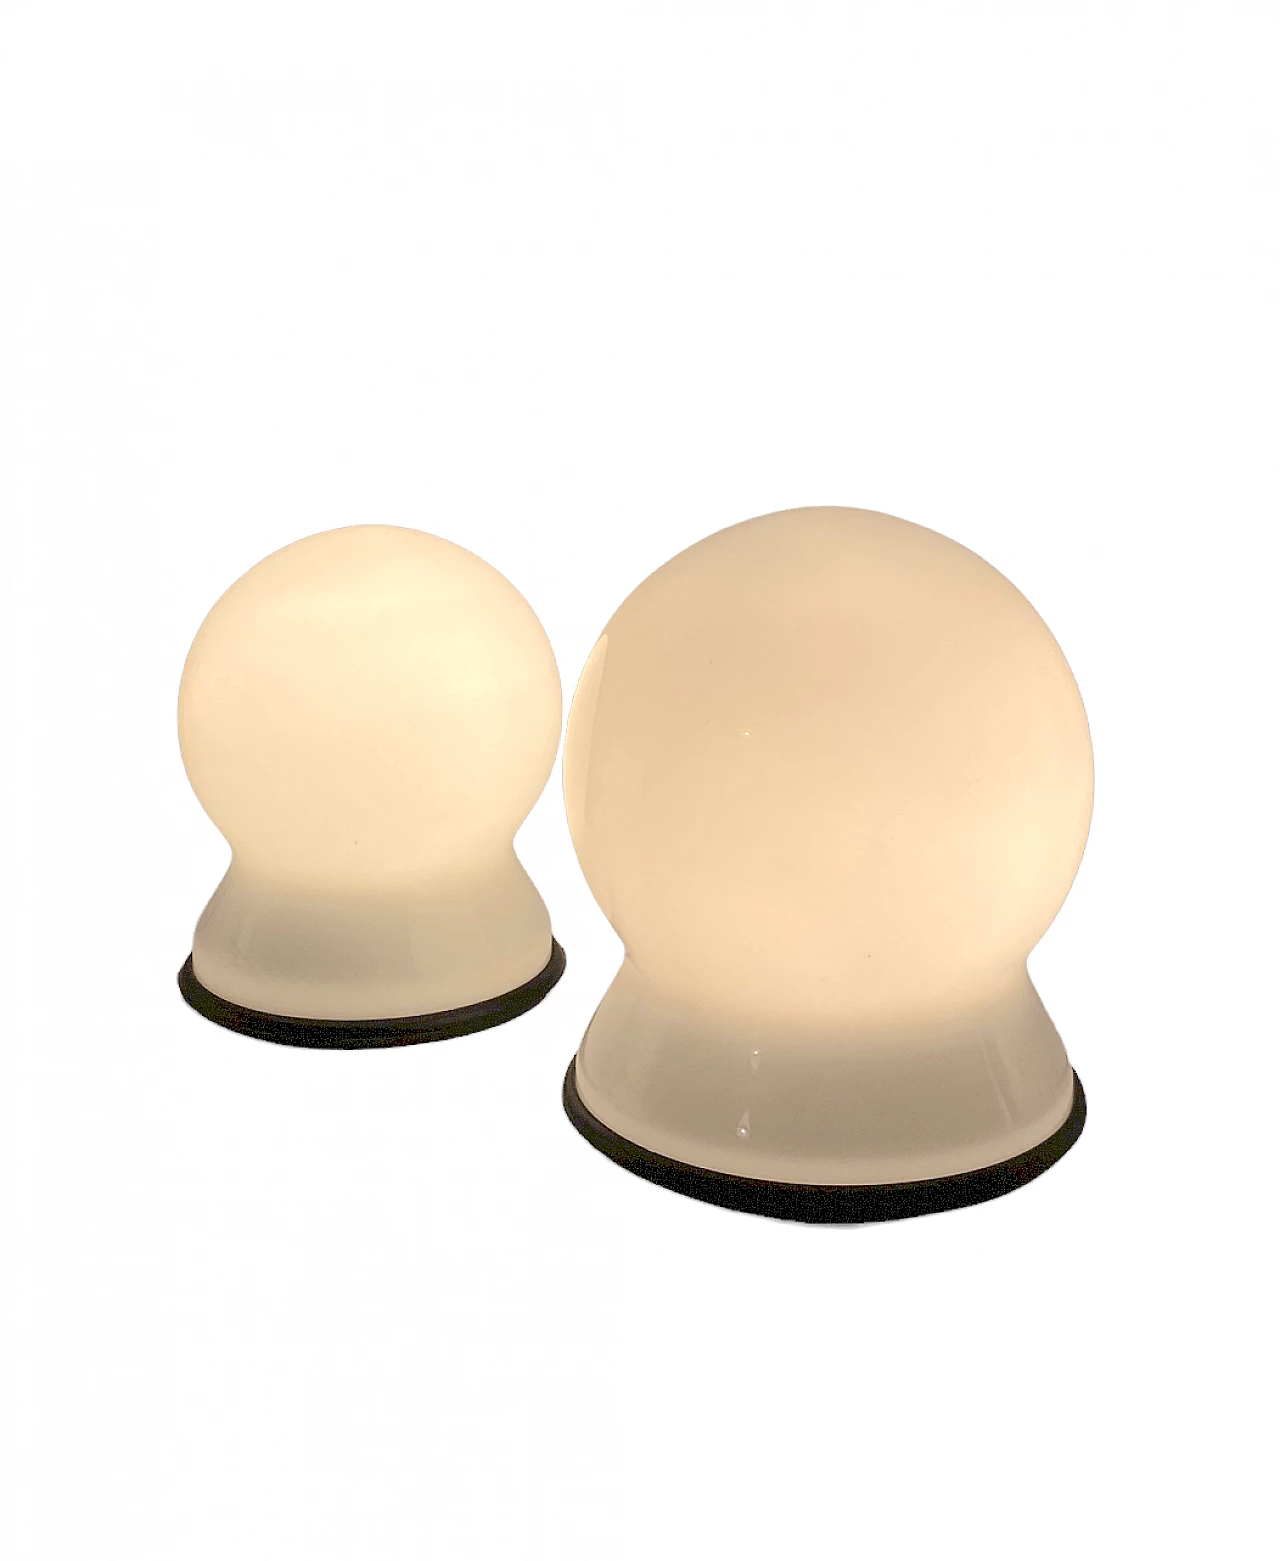 Pair of Scafandro table lamps by Sergio Asti for Candle, 1970s 25